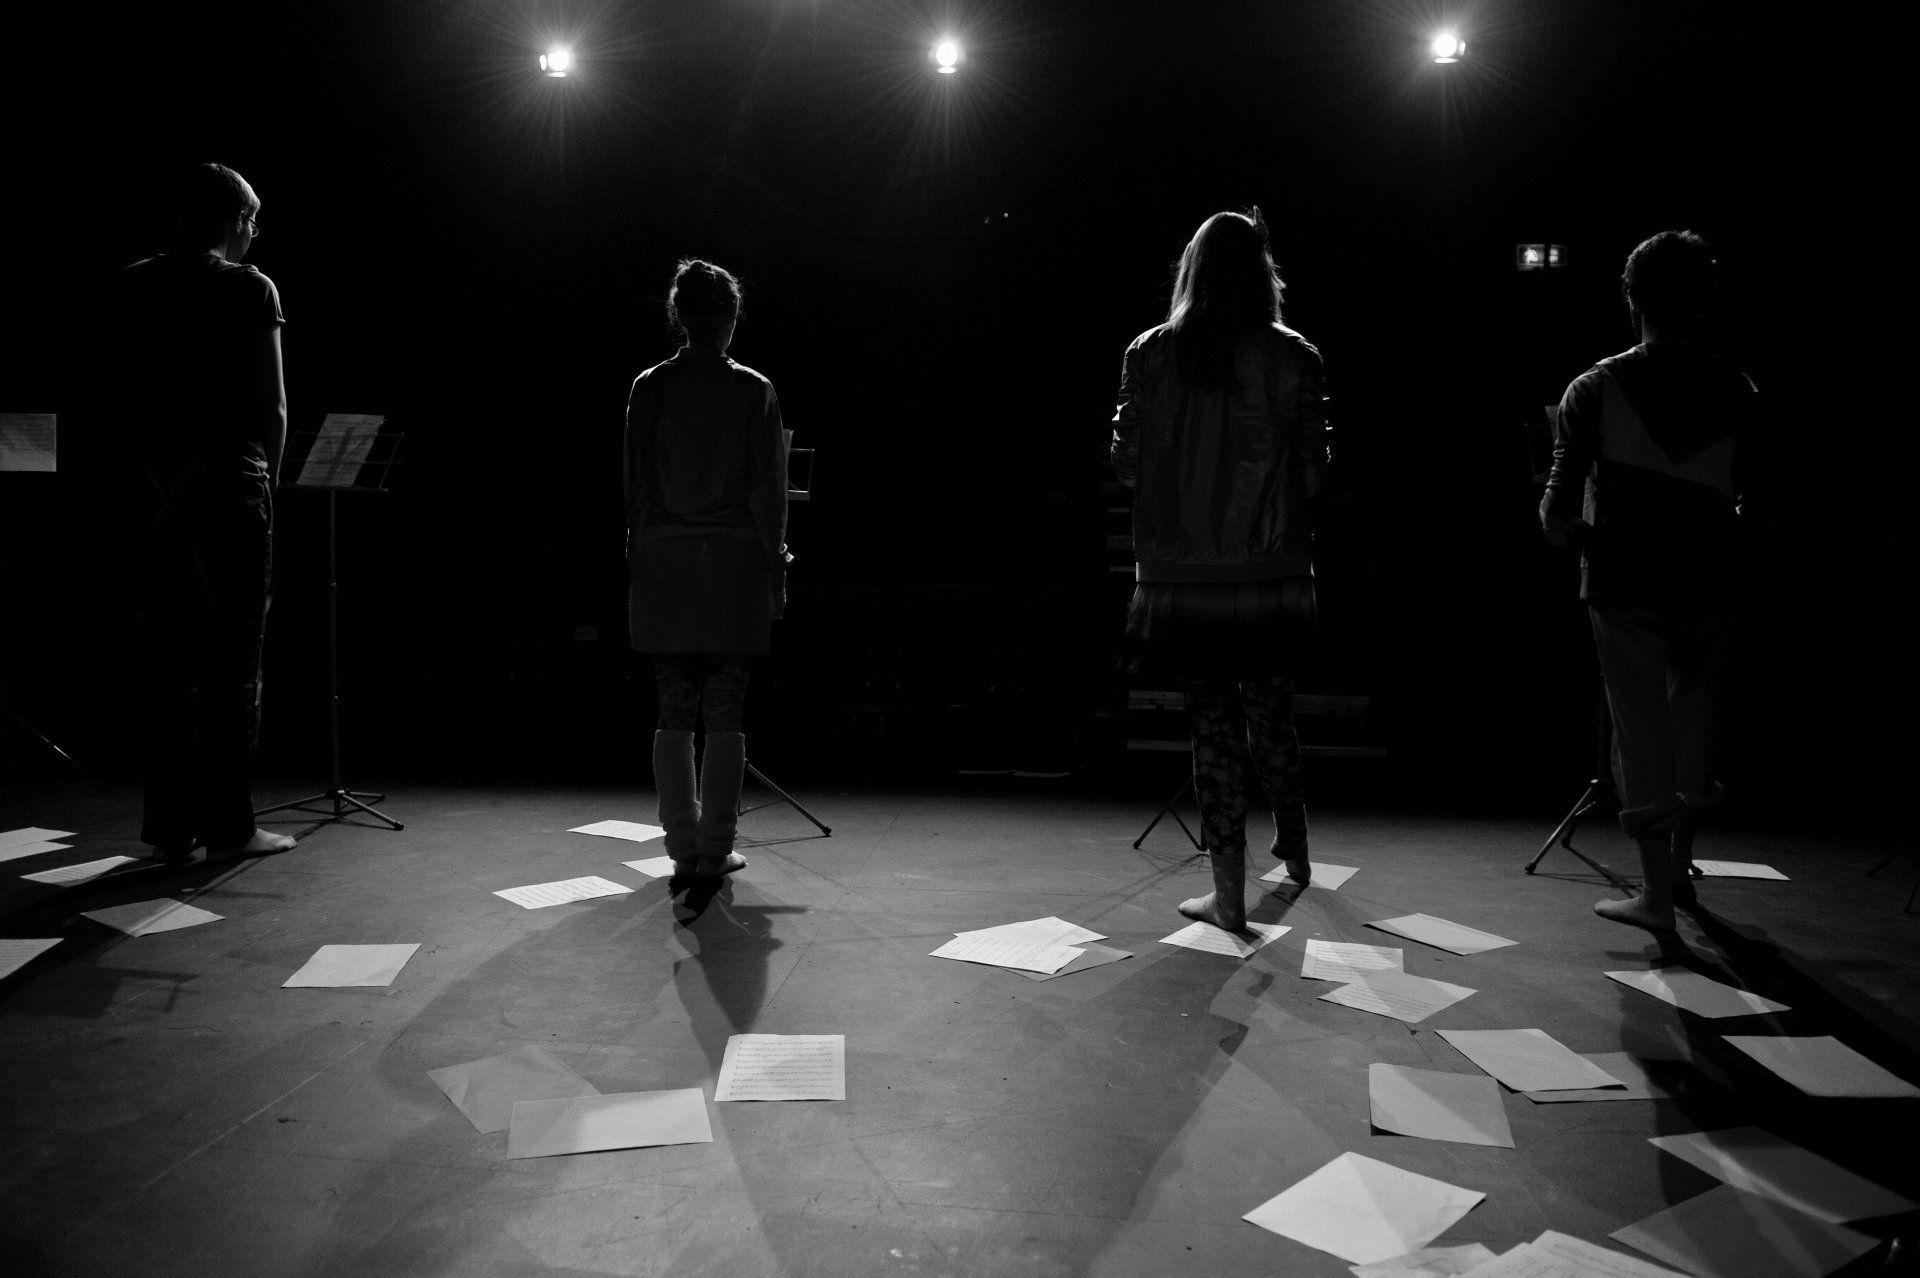 a group of people standing on a stage with papers on the floor